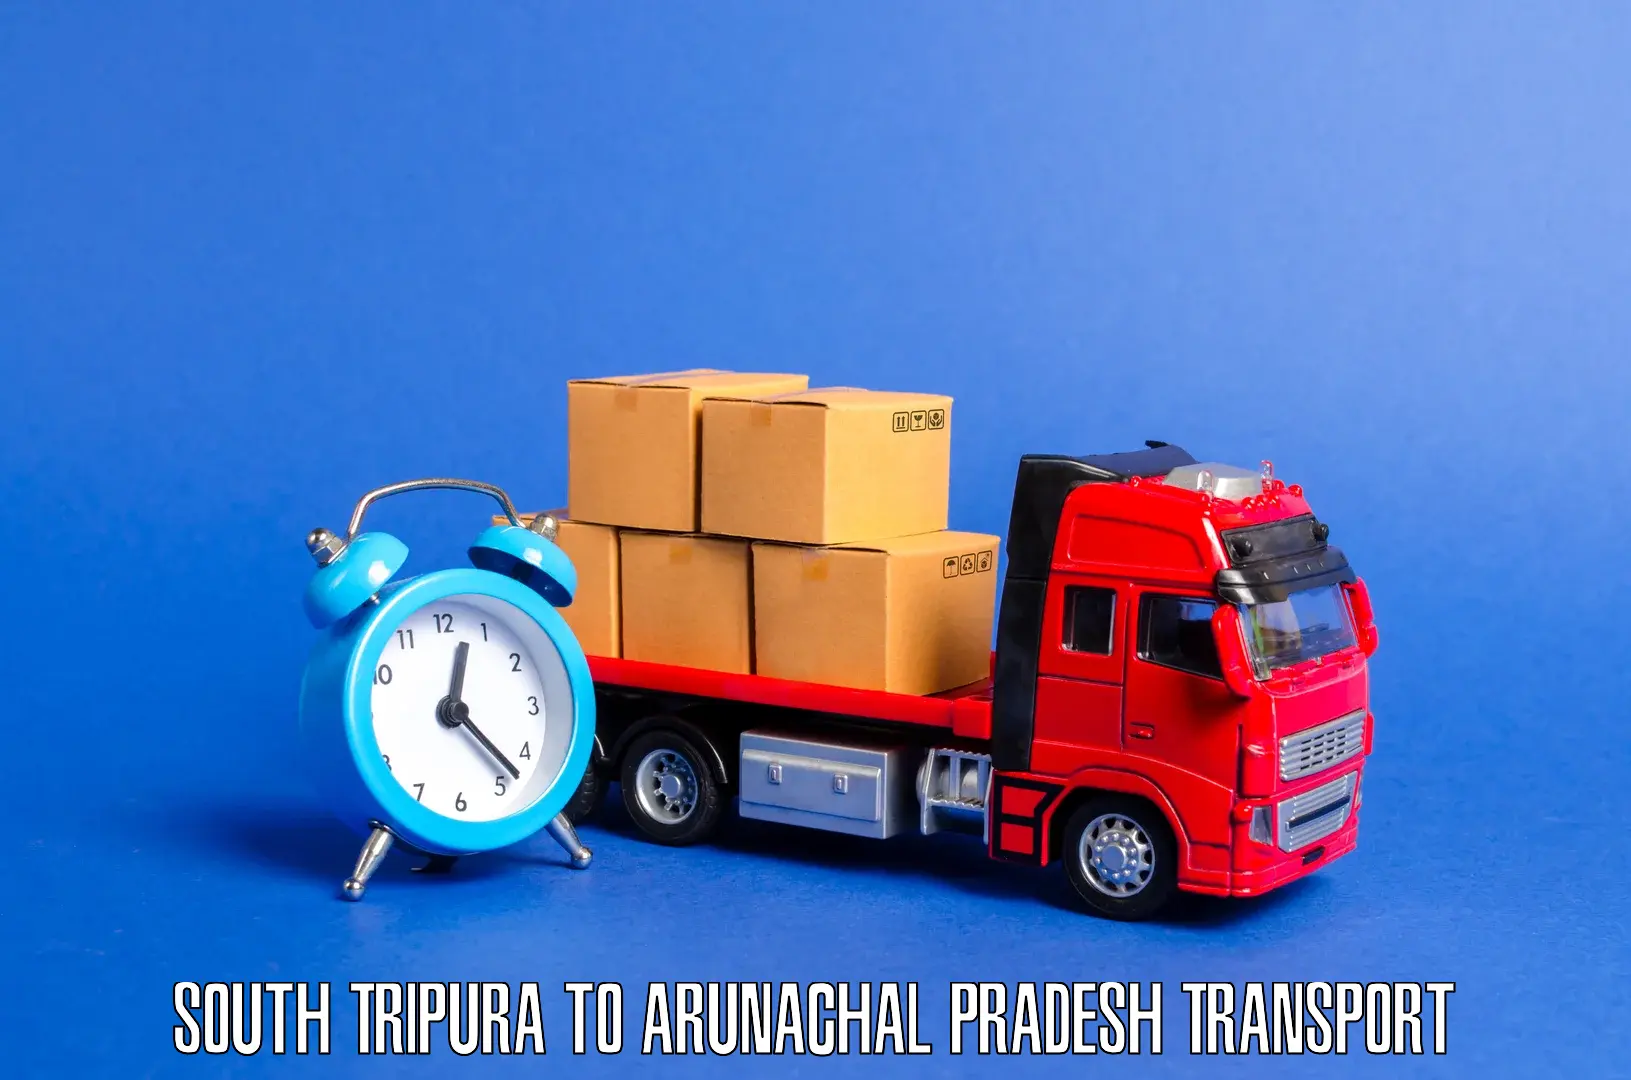 Cargo transport services in South Tripura to Dibang Valley